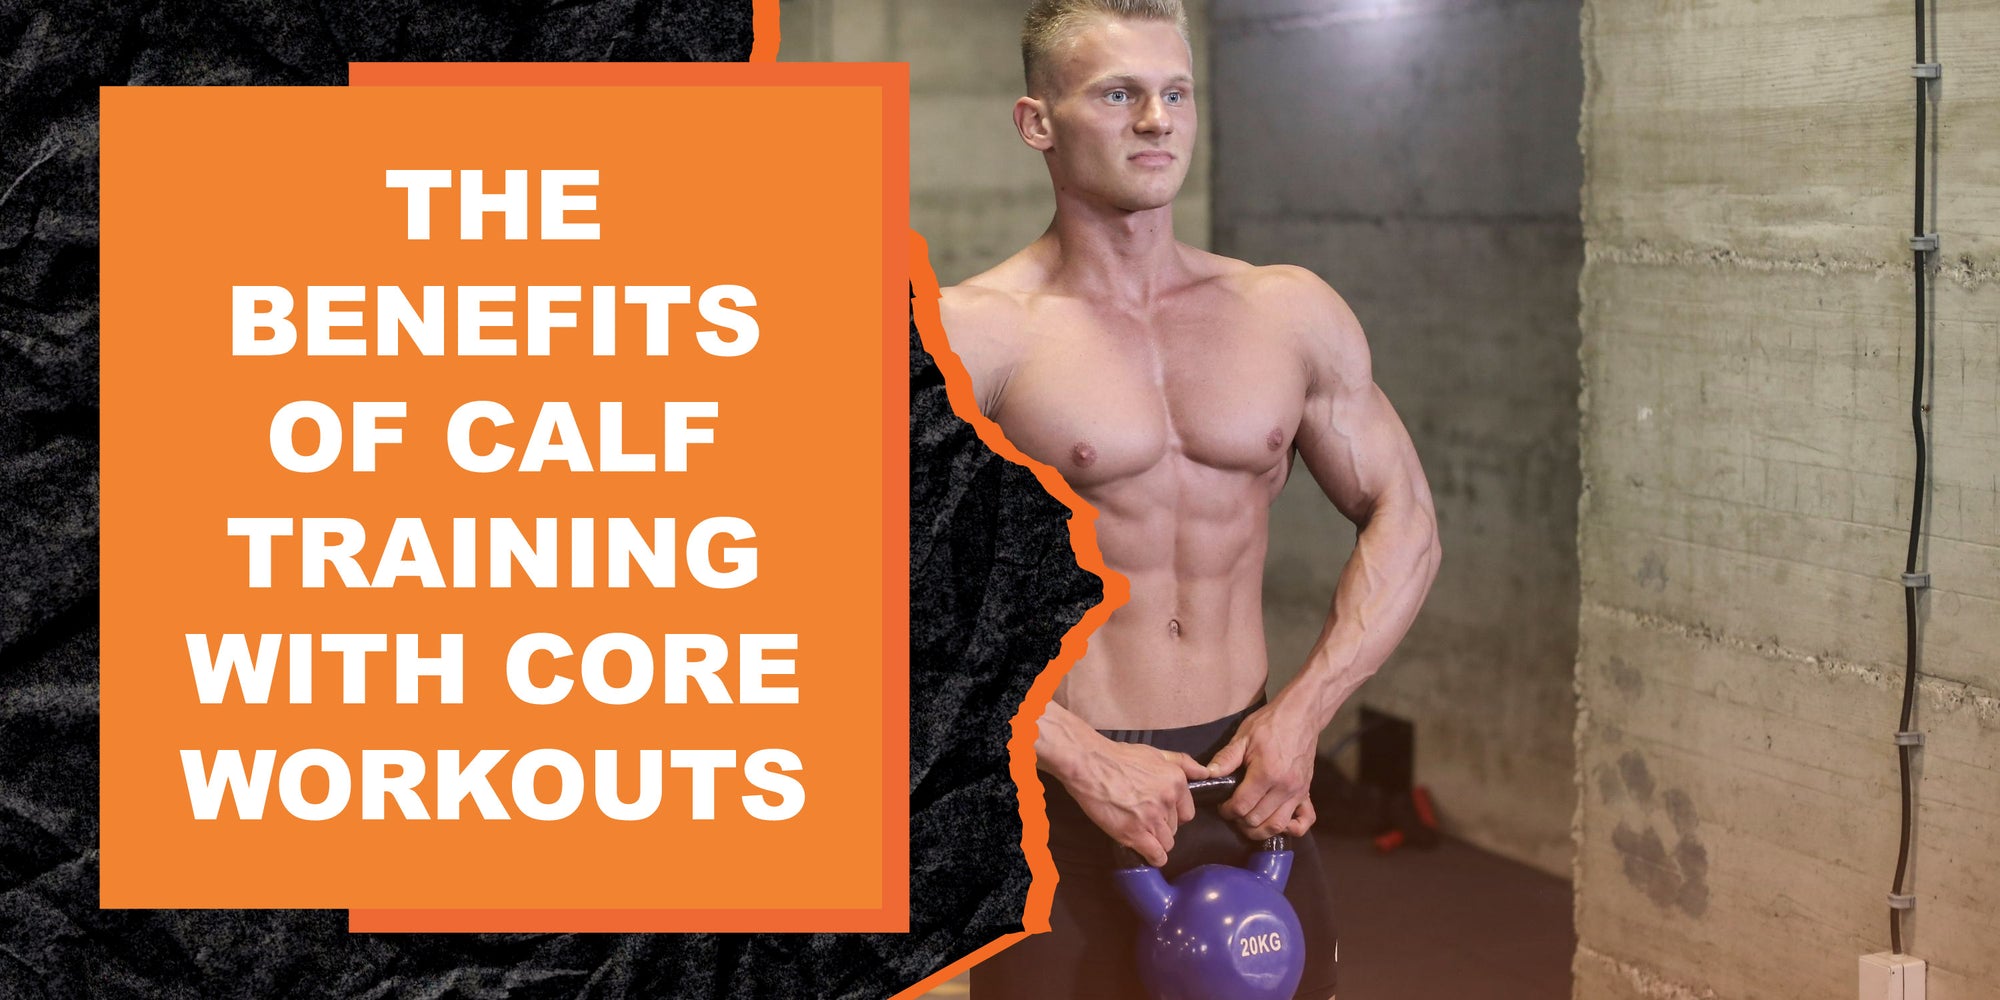 The Benefits of Calf Training with Core Workouts